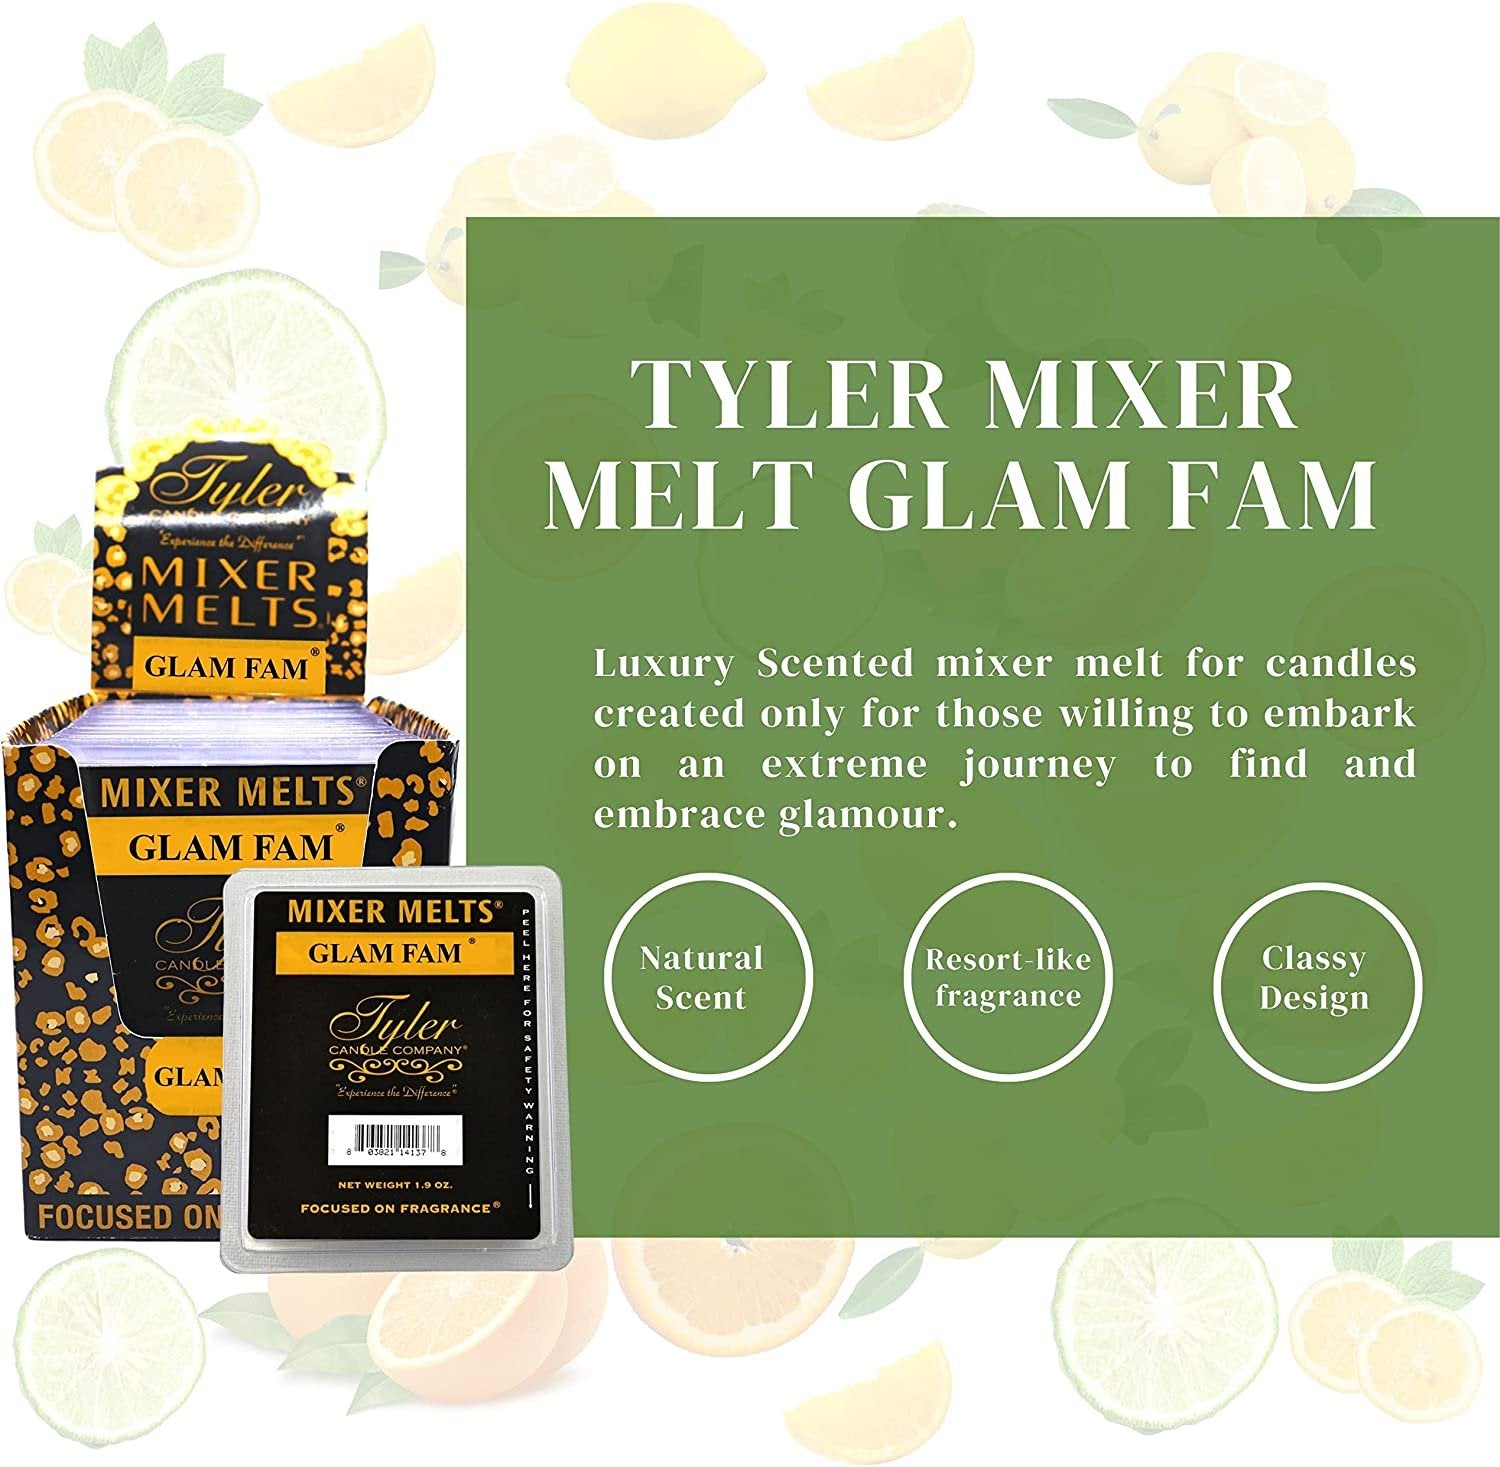 Tyler Candle Company Glam Fam Scent Wax Melts - Soy Wax Scented Mixer Melts with Essential Oils for Wax Warmer - Box of 14, 6 Bars per Melt Multi Purpose Key Chain